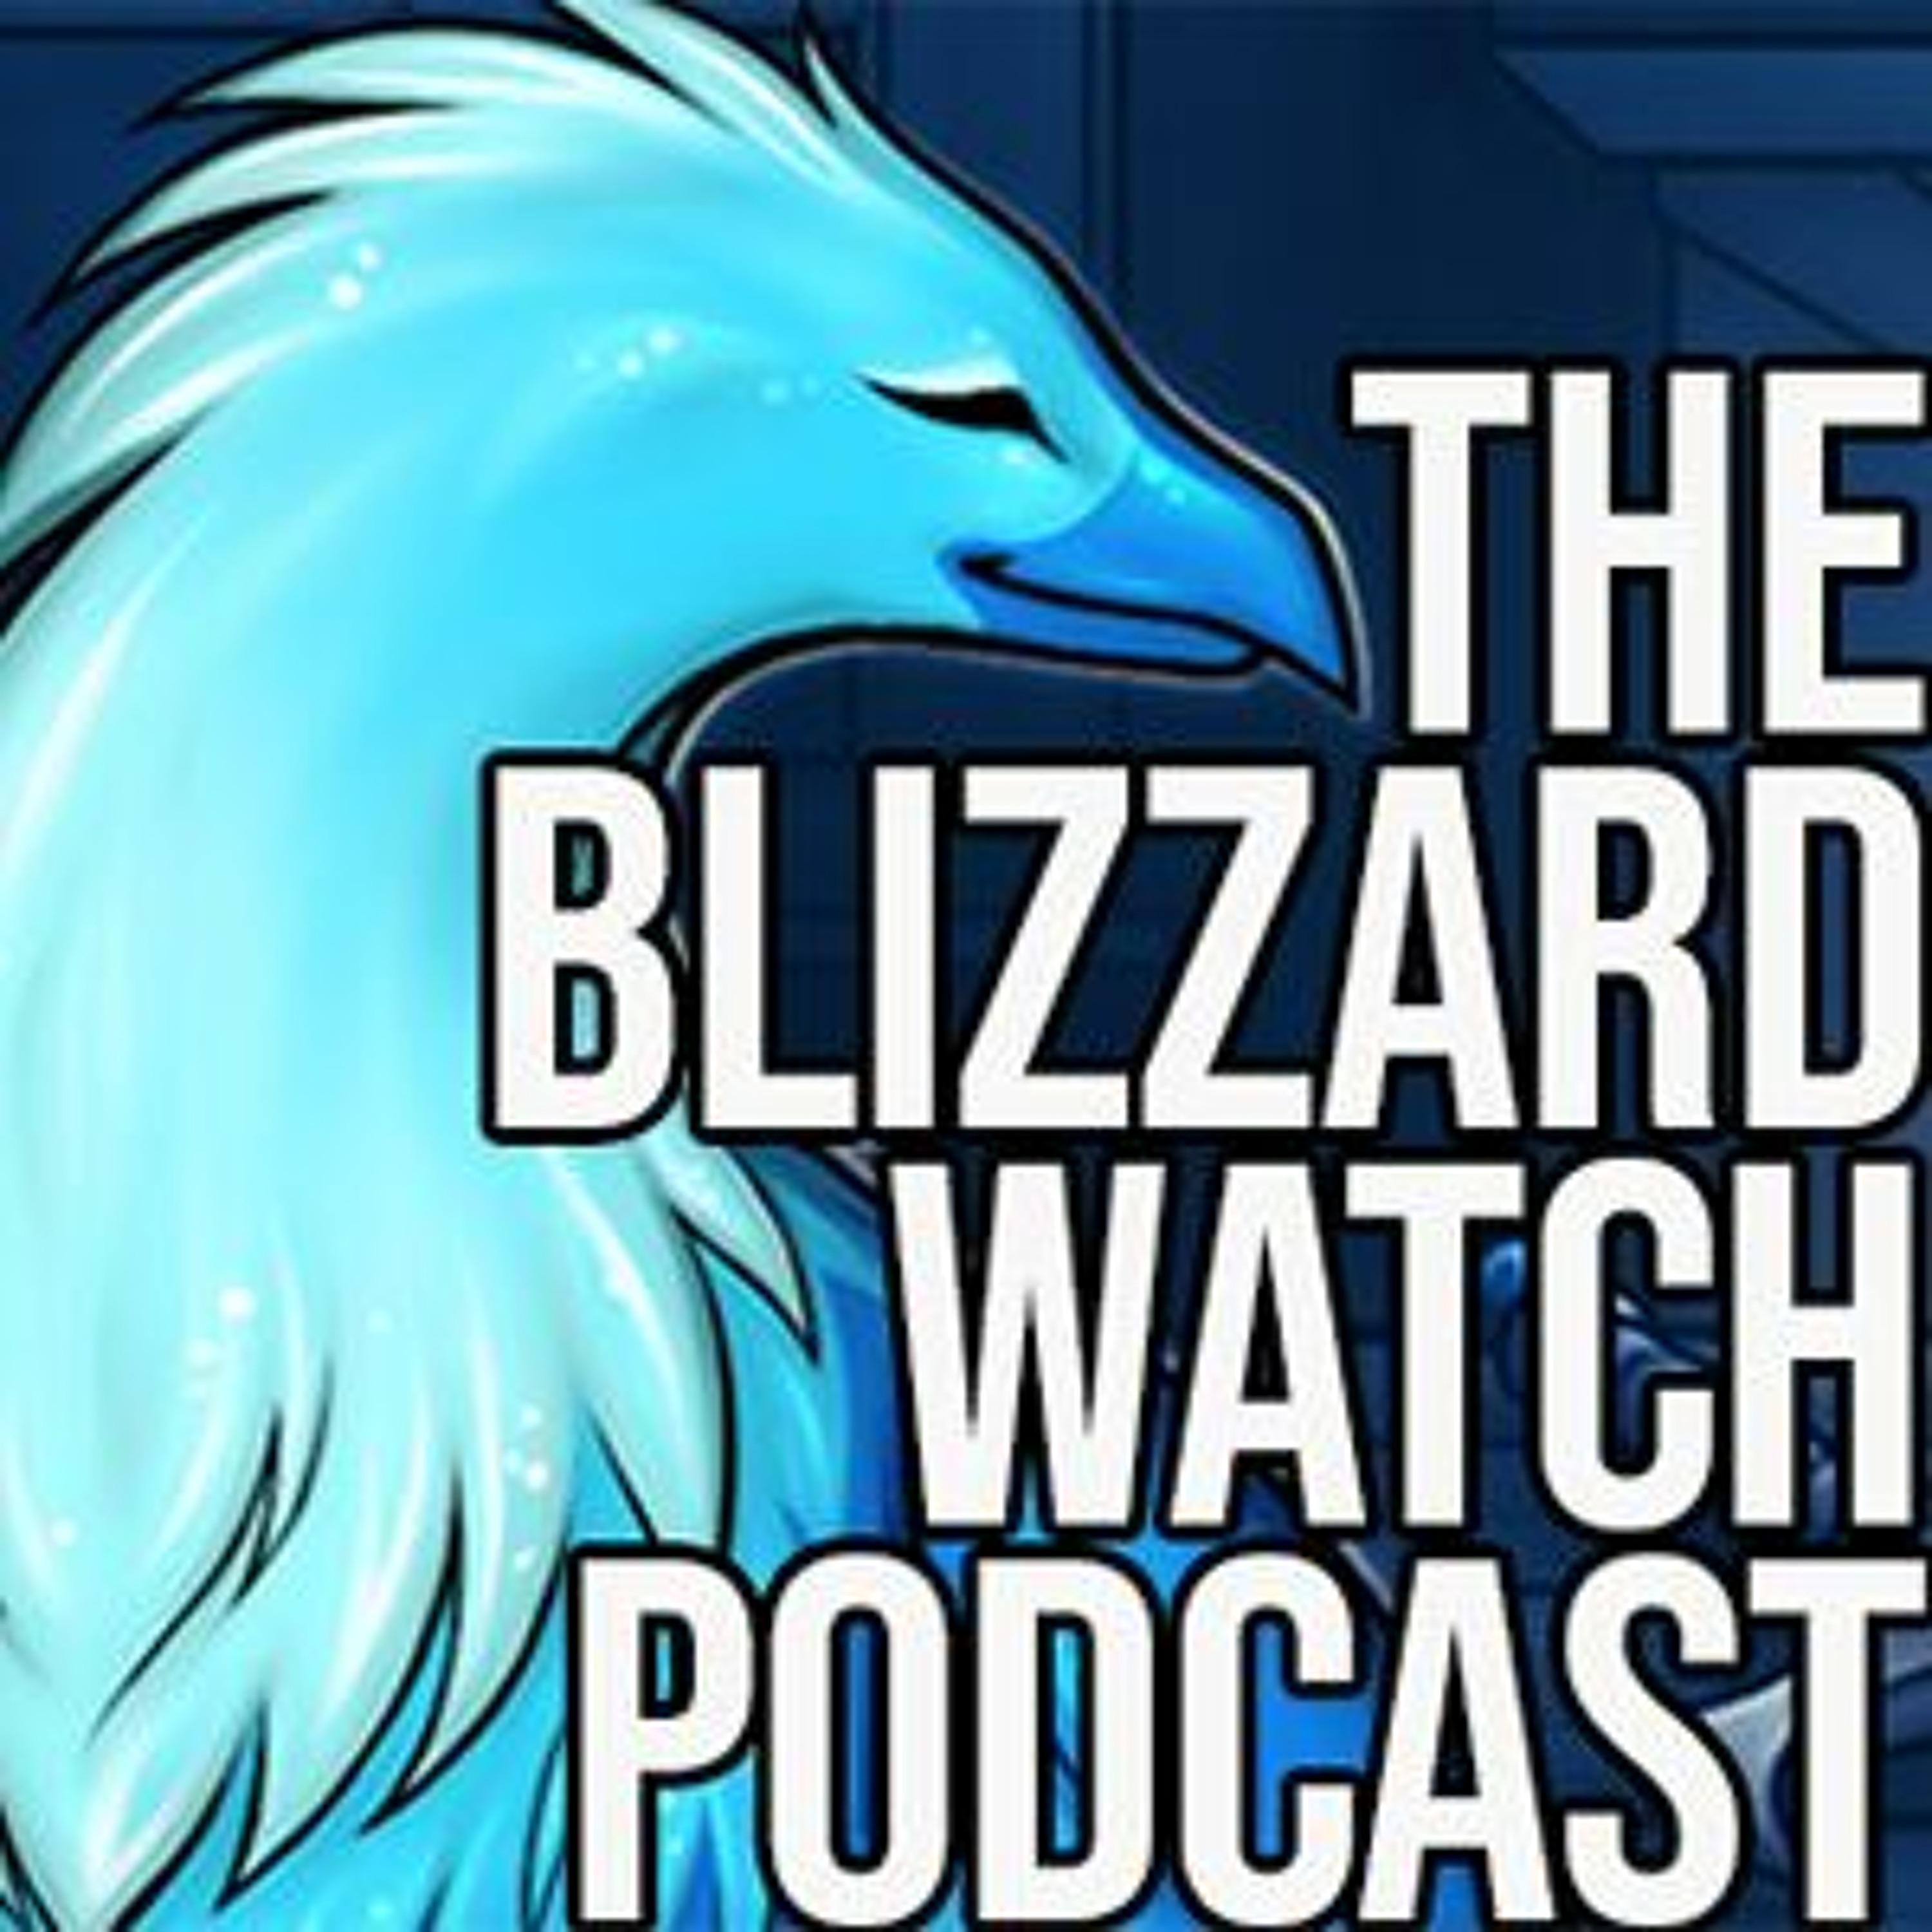 Will Blizzard pull out of the Chinese gaming market?